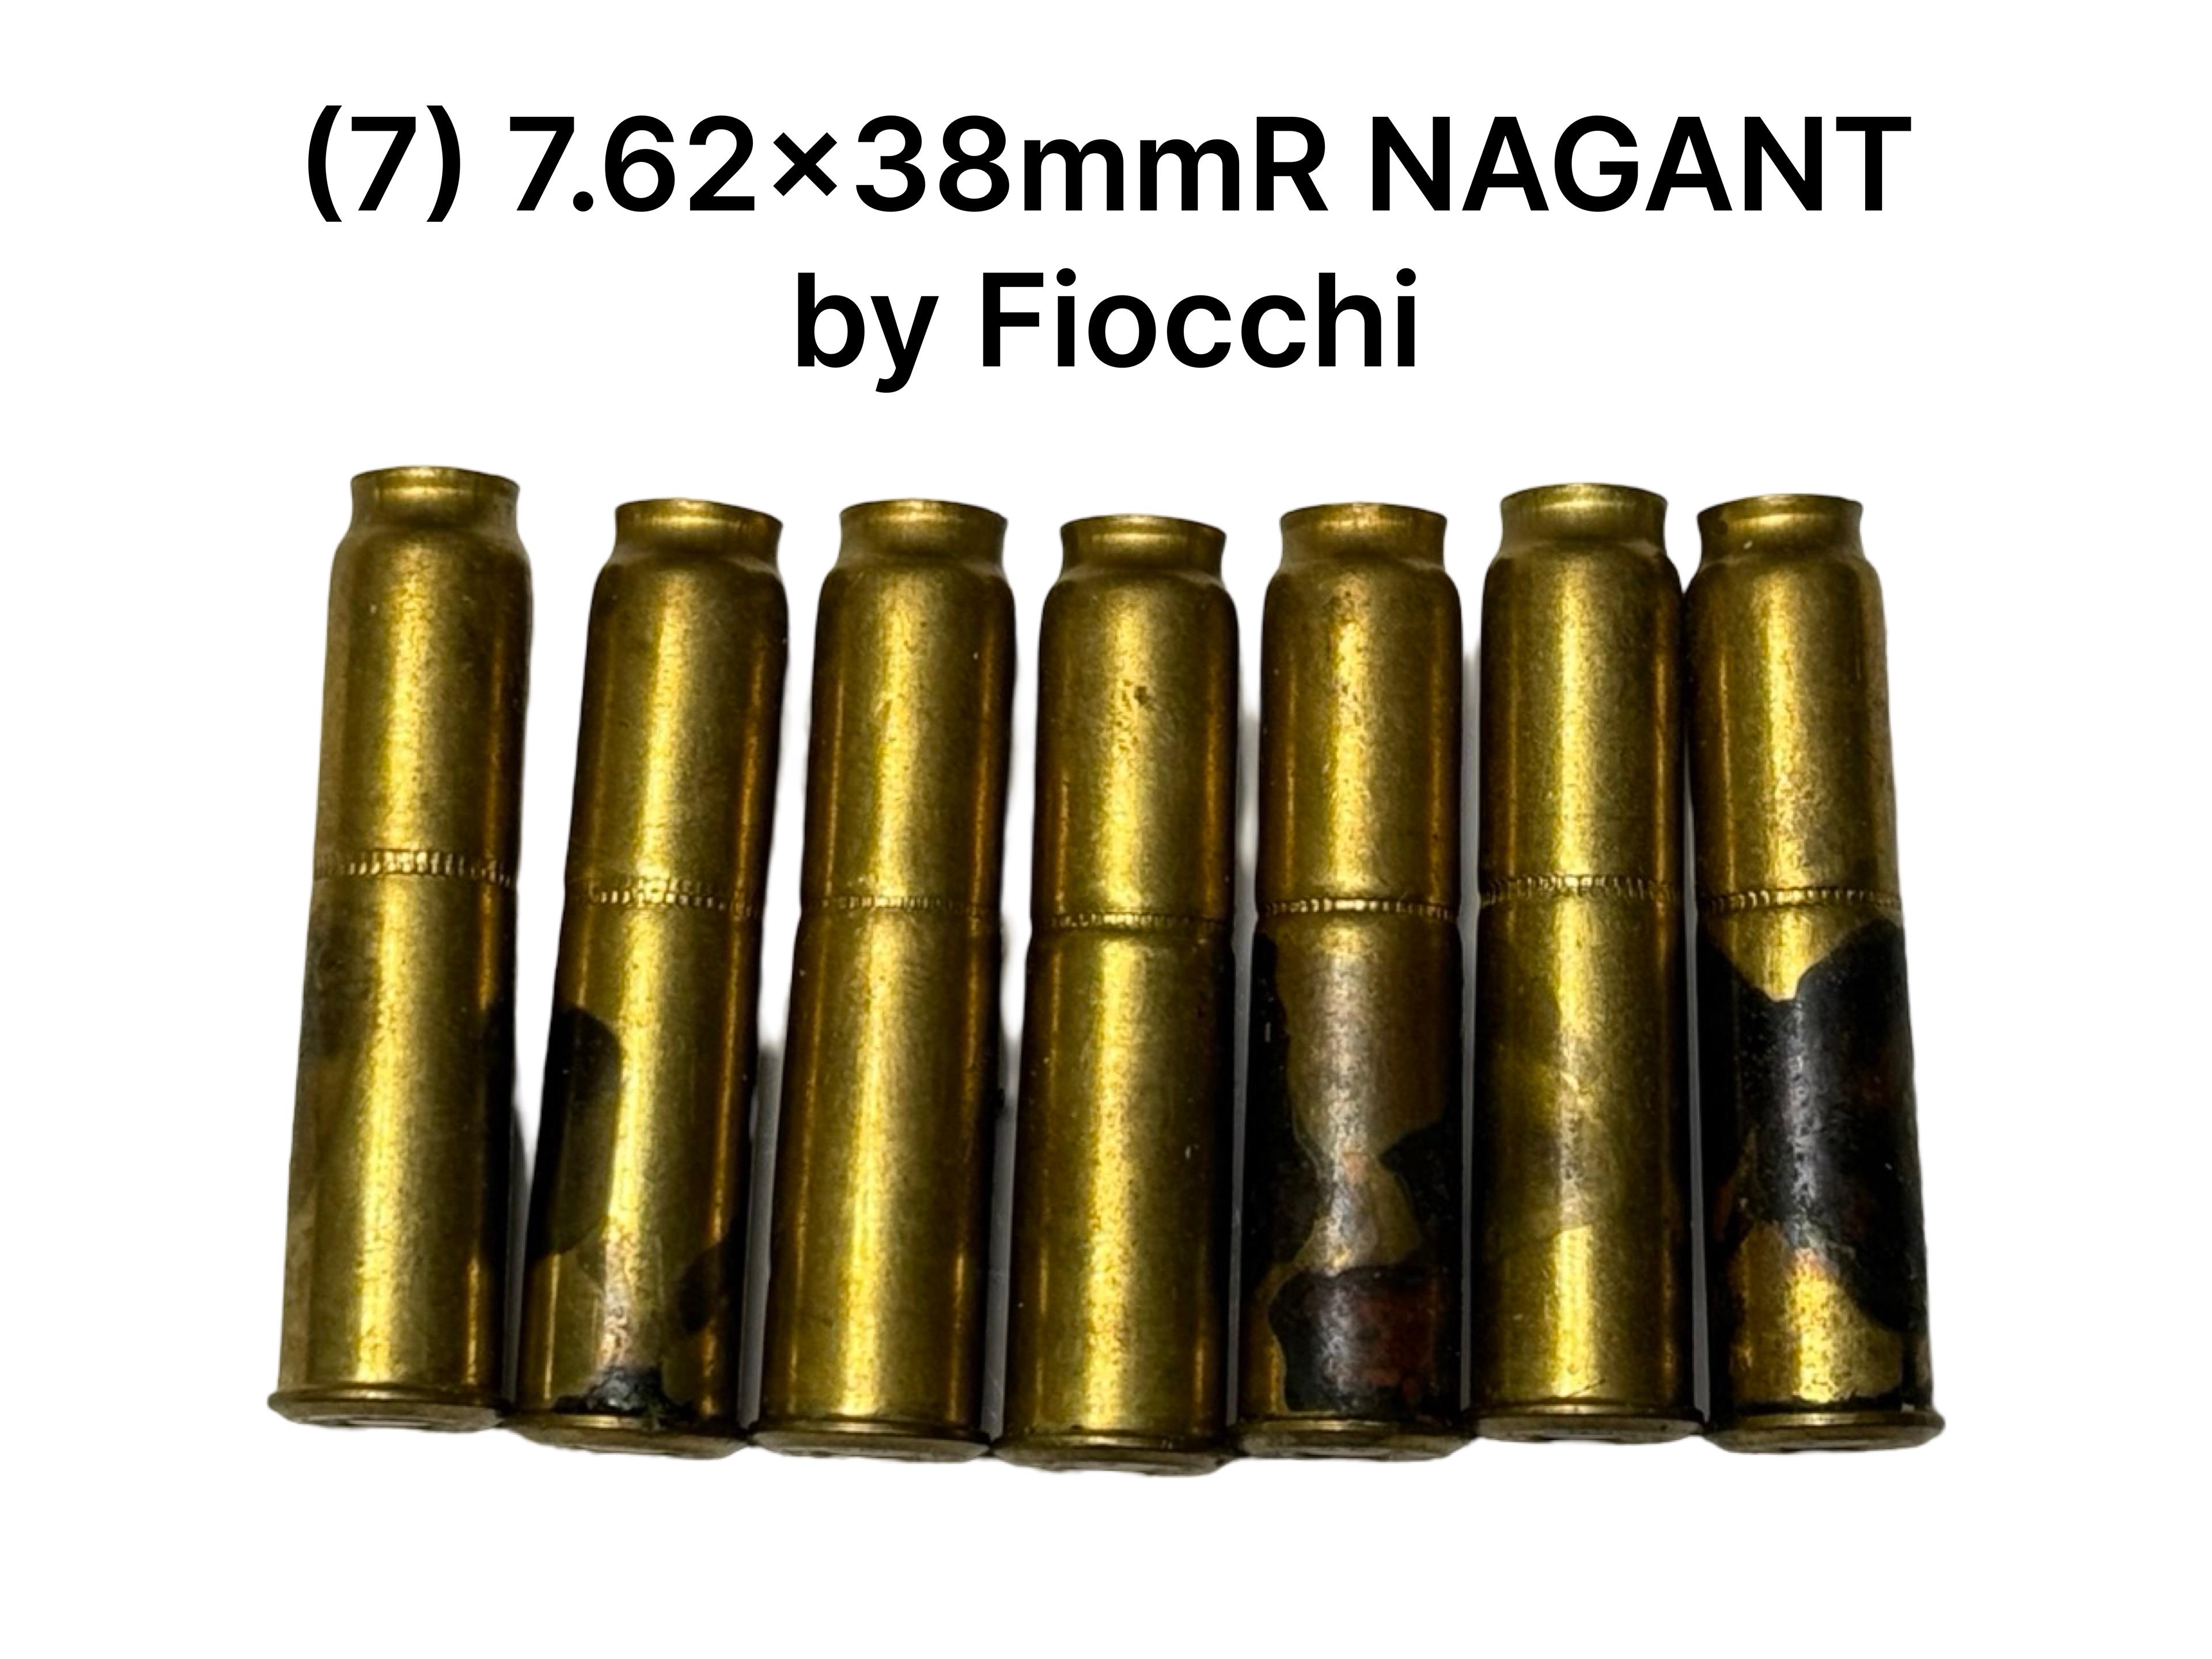 7rds. of 7.62x38mmR NAGANT by Fiocchi